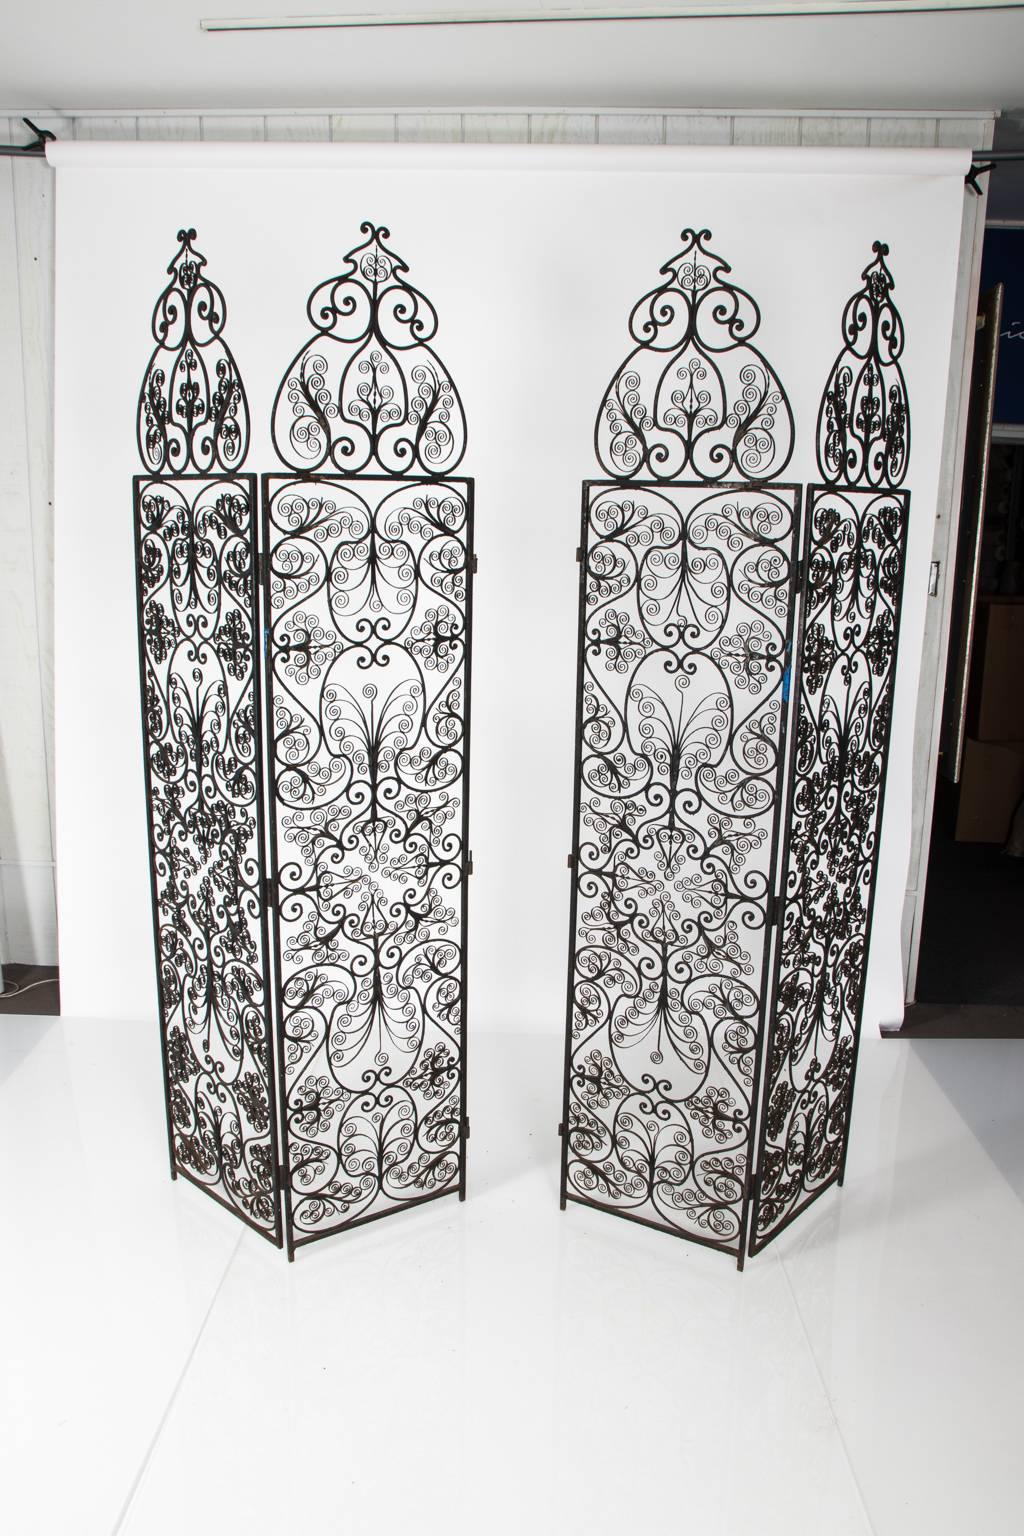 Early 20th Century Four-Paneled Wrought Iron Screen